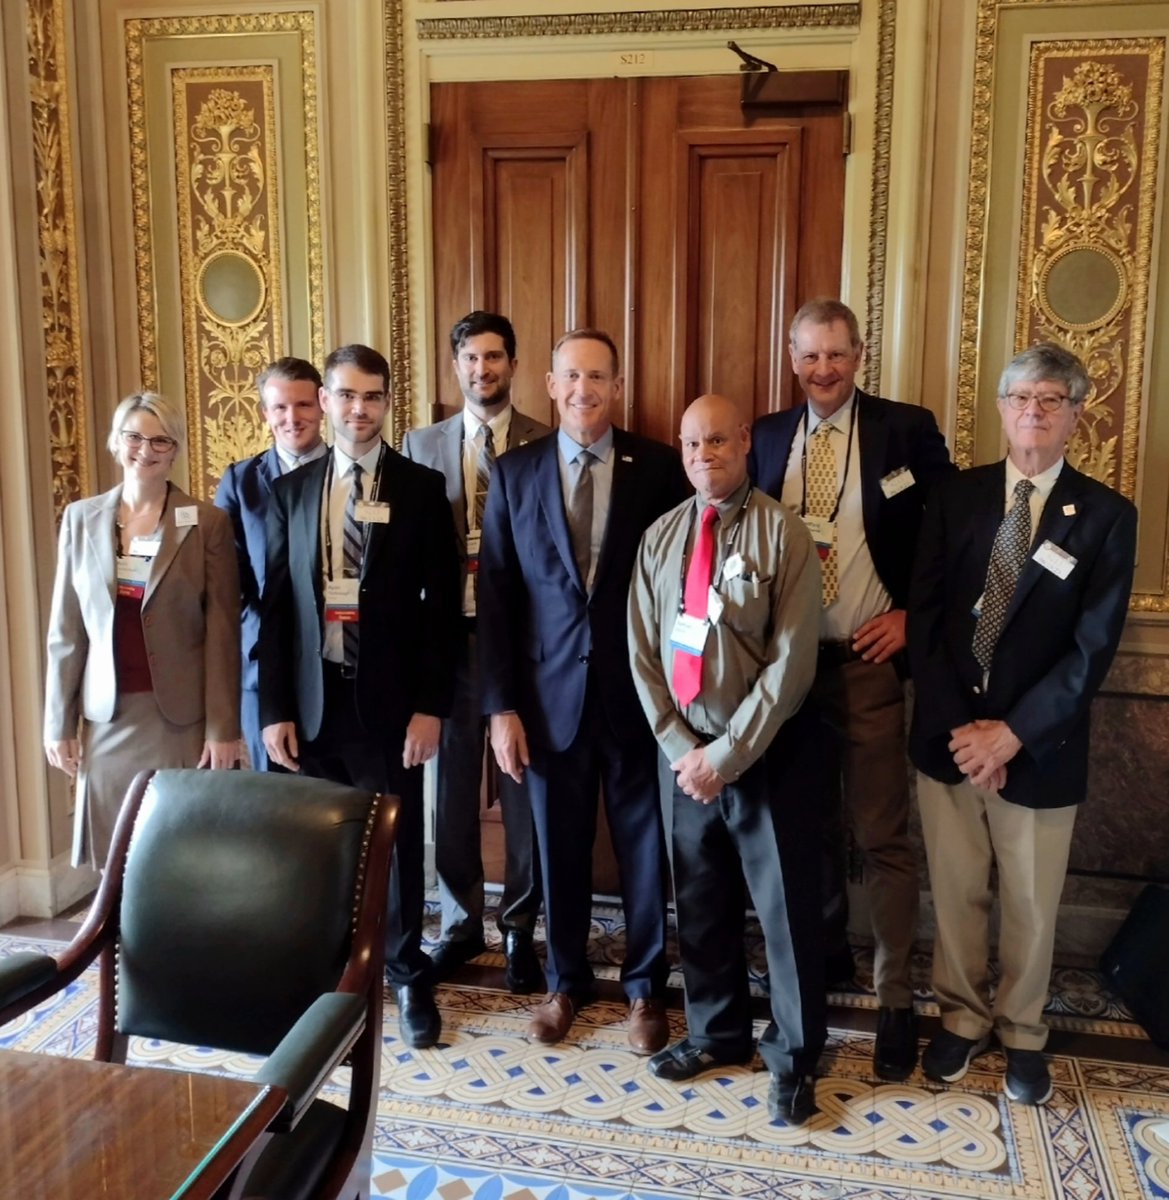 On behalf of @citizensclimate's NC conservatives, THANK YOU, Charlie Hobbs, for your time and insights with us today, and THANK YOU @SenTedBuddNC for your partnership in pursuing #bipartisan #permittingreform.  

#BipartisanClimate
#ConservativeClimate
#CCL2023